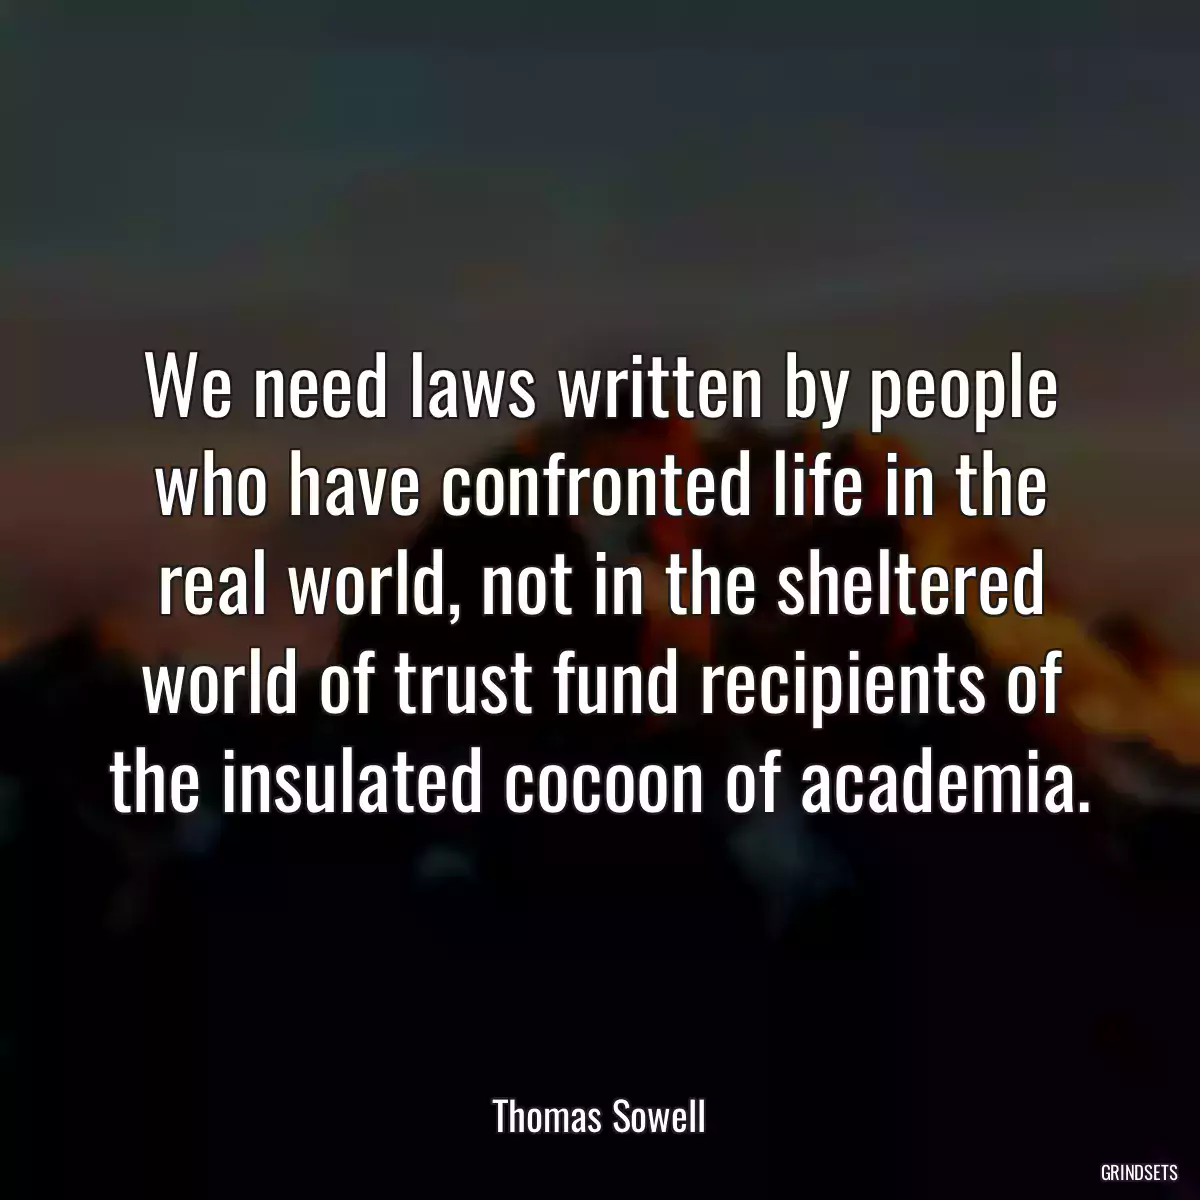 We need laws written by people who have confronted life in the real world, not in the sheltered world of trust fund recipients of the insulated cocoon of academia.